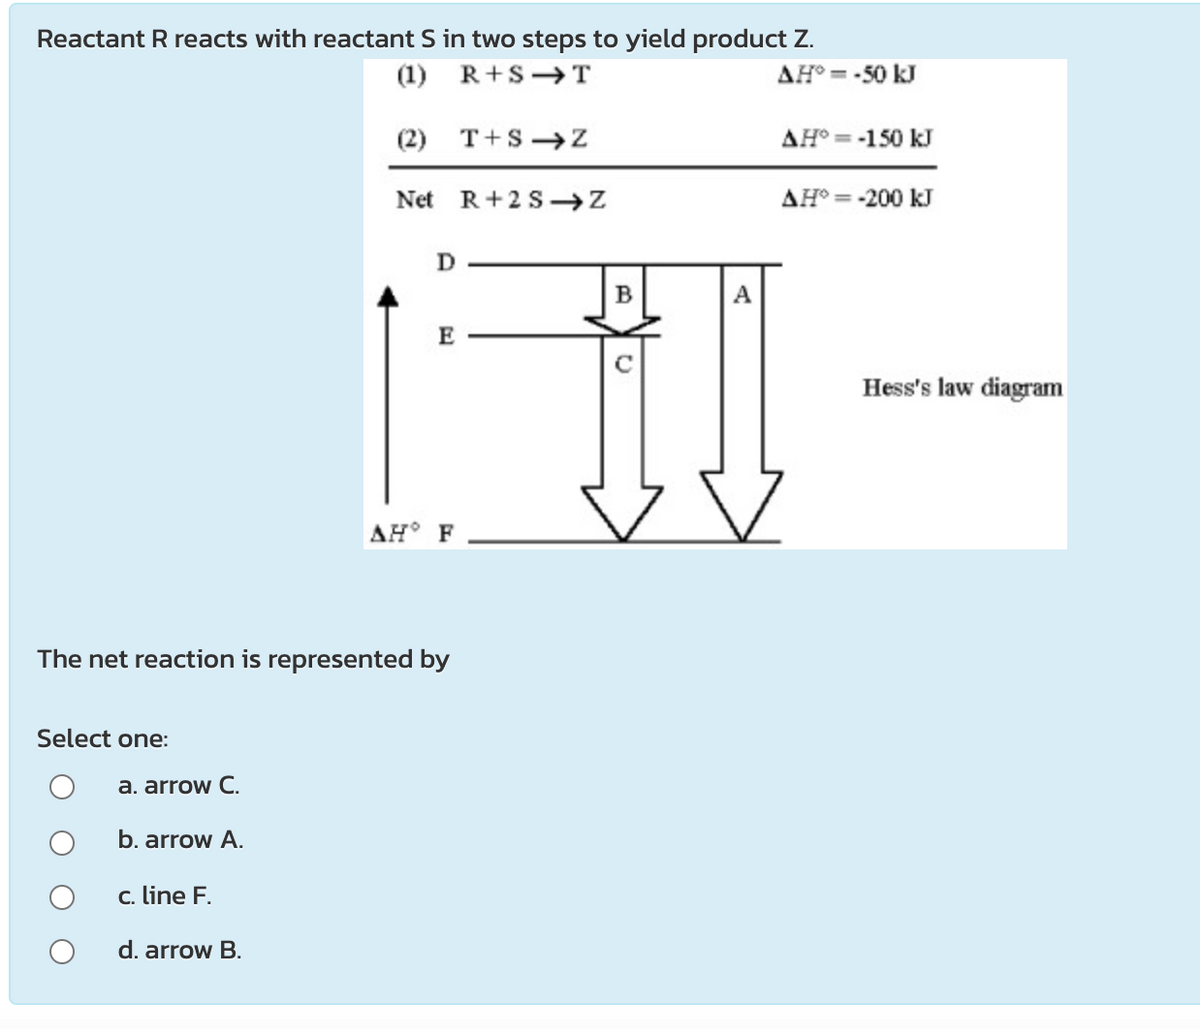 Reactant R reacts with reactant S in two steps to yield product Z.
(1)
R+S T
AH° = -50 kJ
(2) T+S→z
AH° = -150 kJ
Net R+2S→Z
AH° = -200 kJ
D
B
A
E
Hess's law diagram
AH° F
The net reaction is represented by
Select one:
a. arrow C.
b. arrow A.
c. line F.
d. arrow B.
